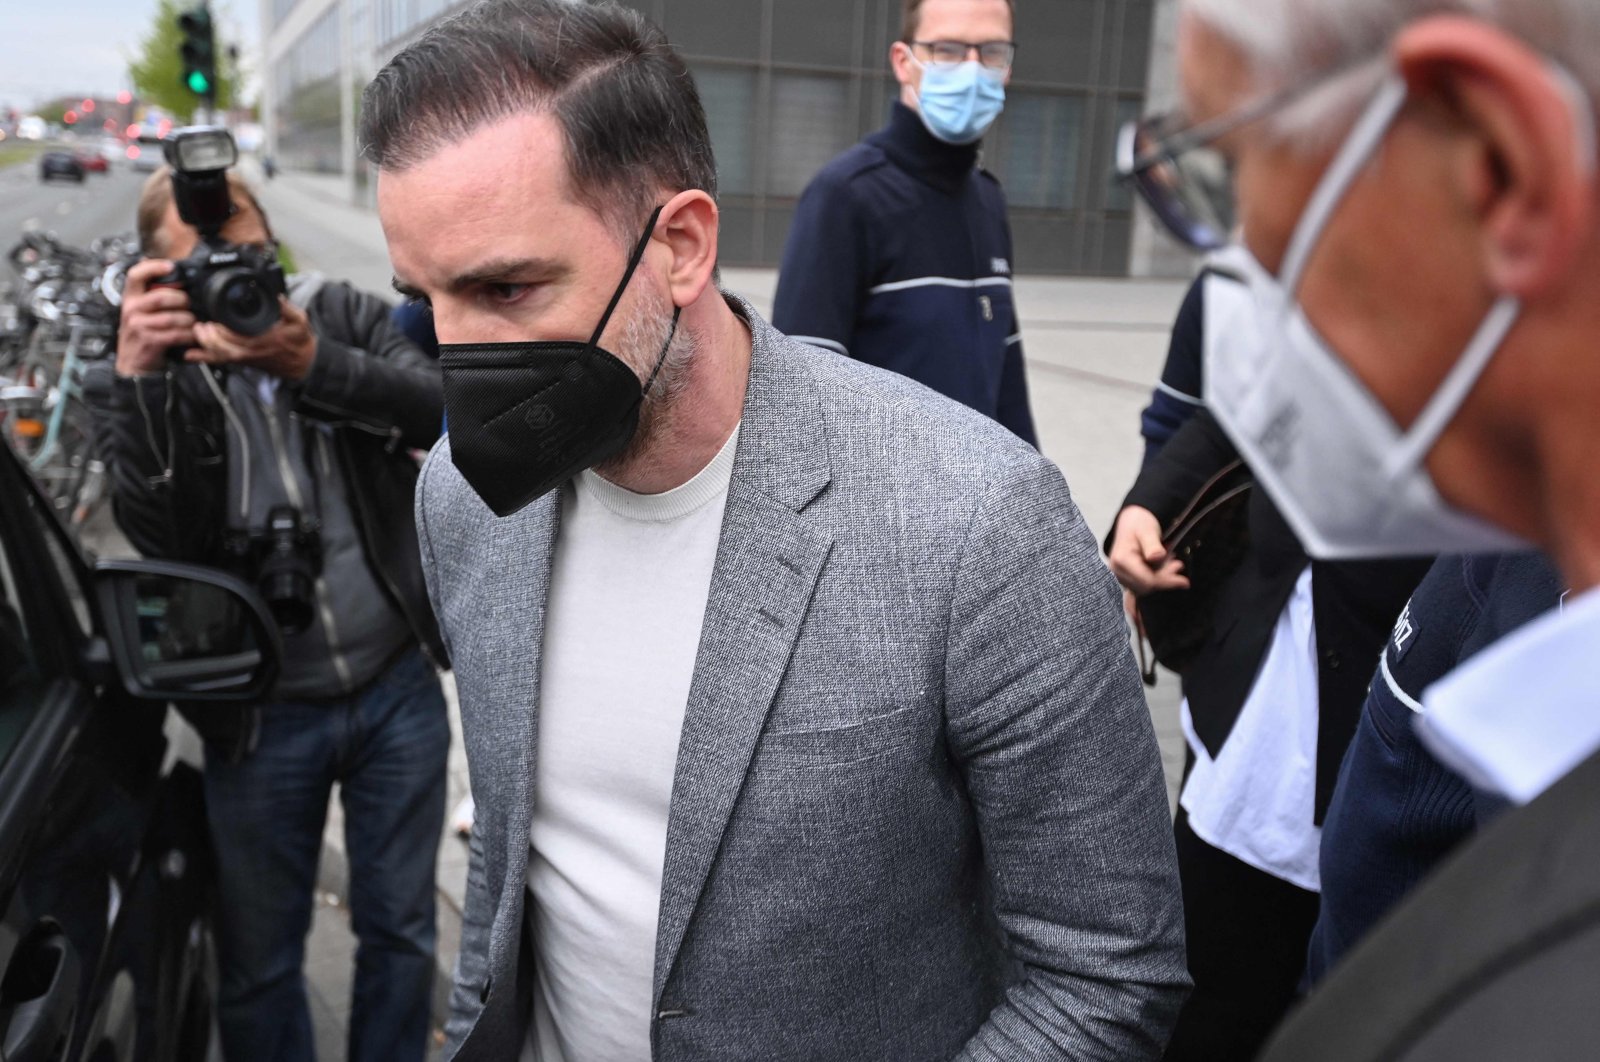 Former German footballer Christoph Metzelder (C) leaves the district court for the start of the trial against him on child pornography charges in Duesseldorf, western Germany, April 29, 2021. (AFP Photo)